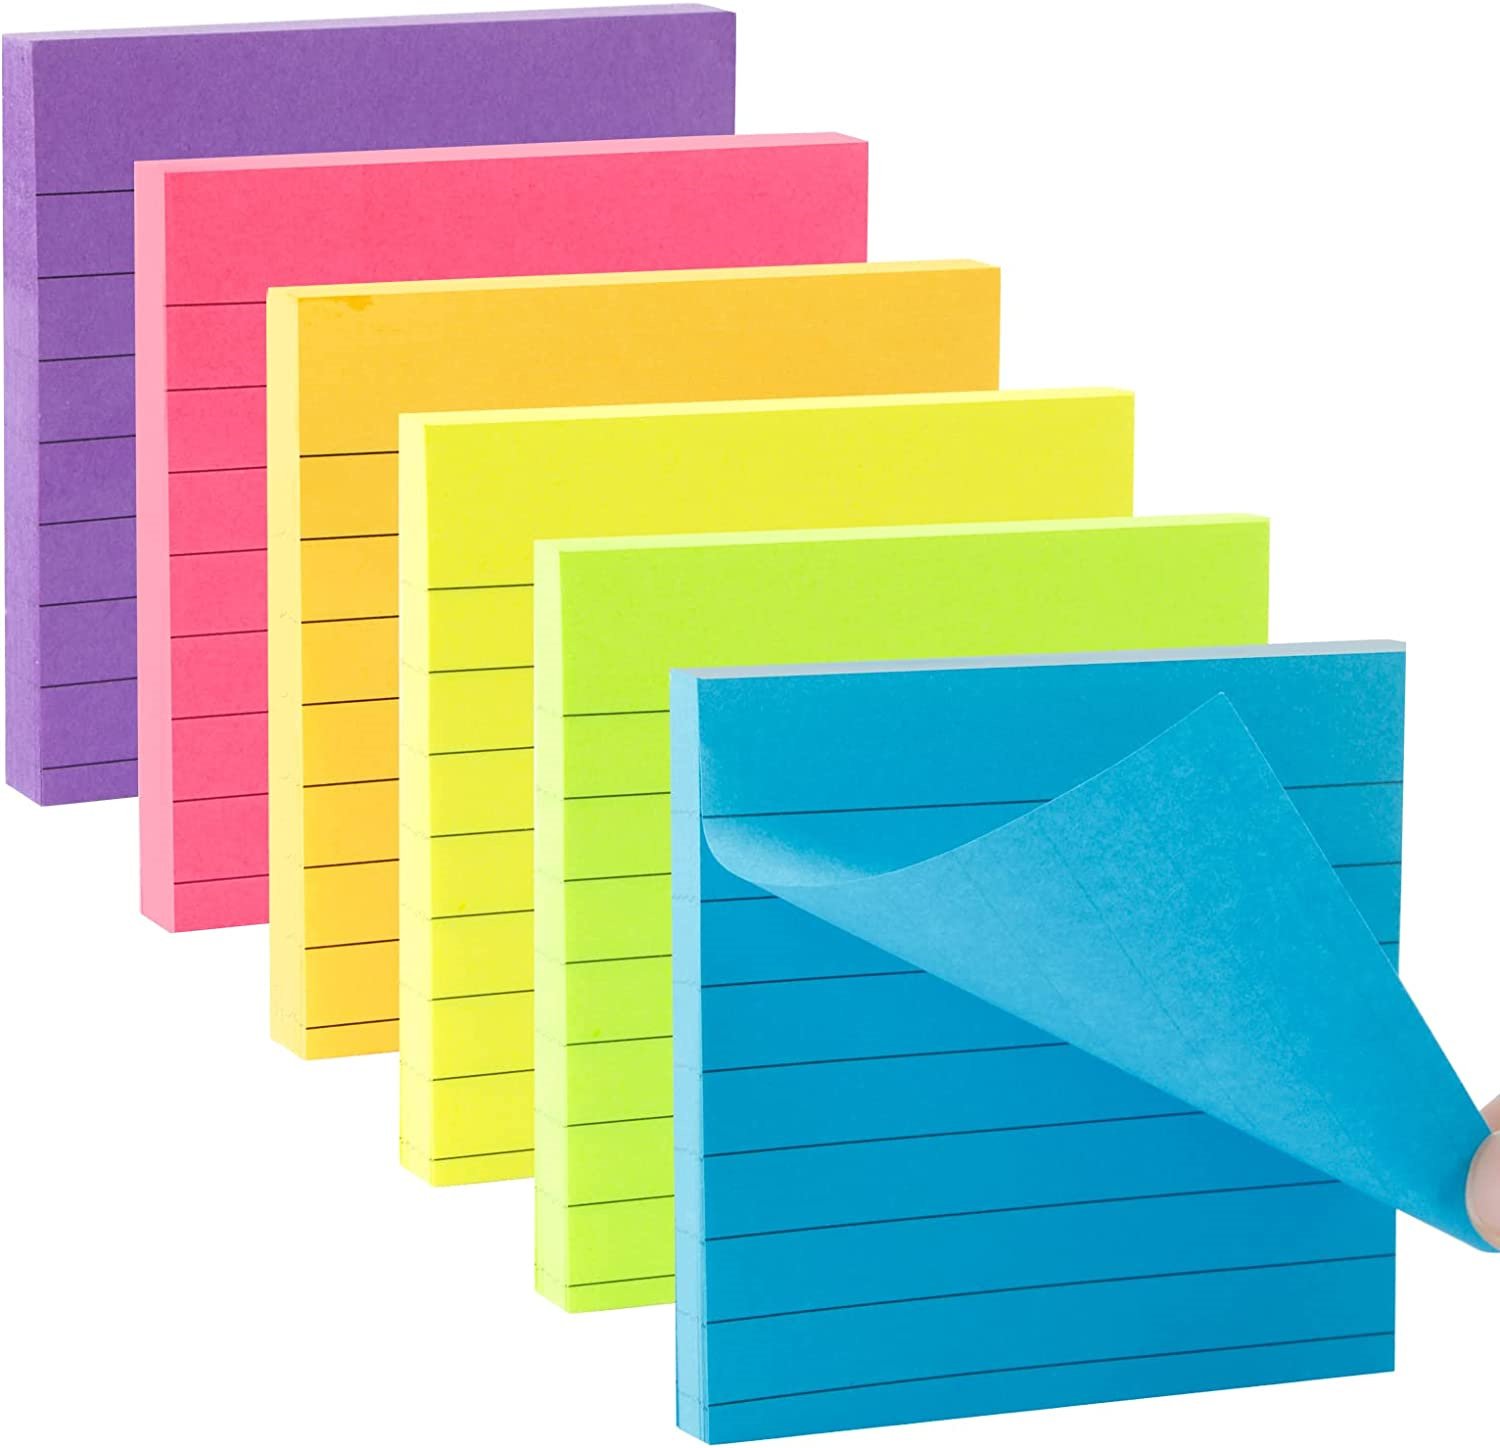 Casewin Sticky Notes - Post It Notes 3x3 inch Bright Colors, Super  Self-Stick Note Pads for Office Supplies, Home, Notebook, School(8 Pads)